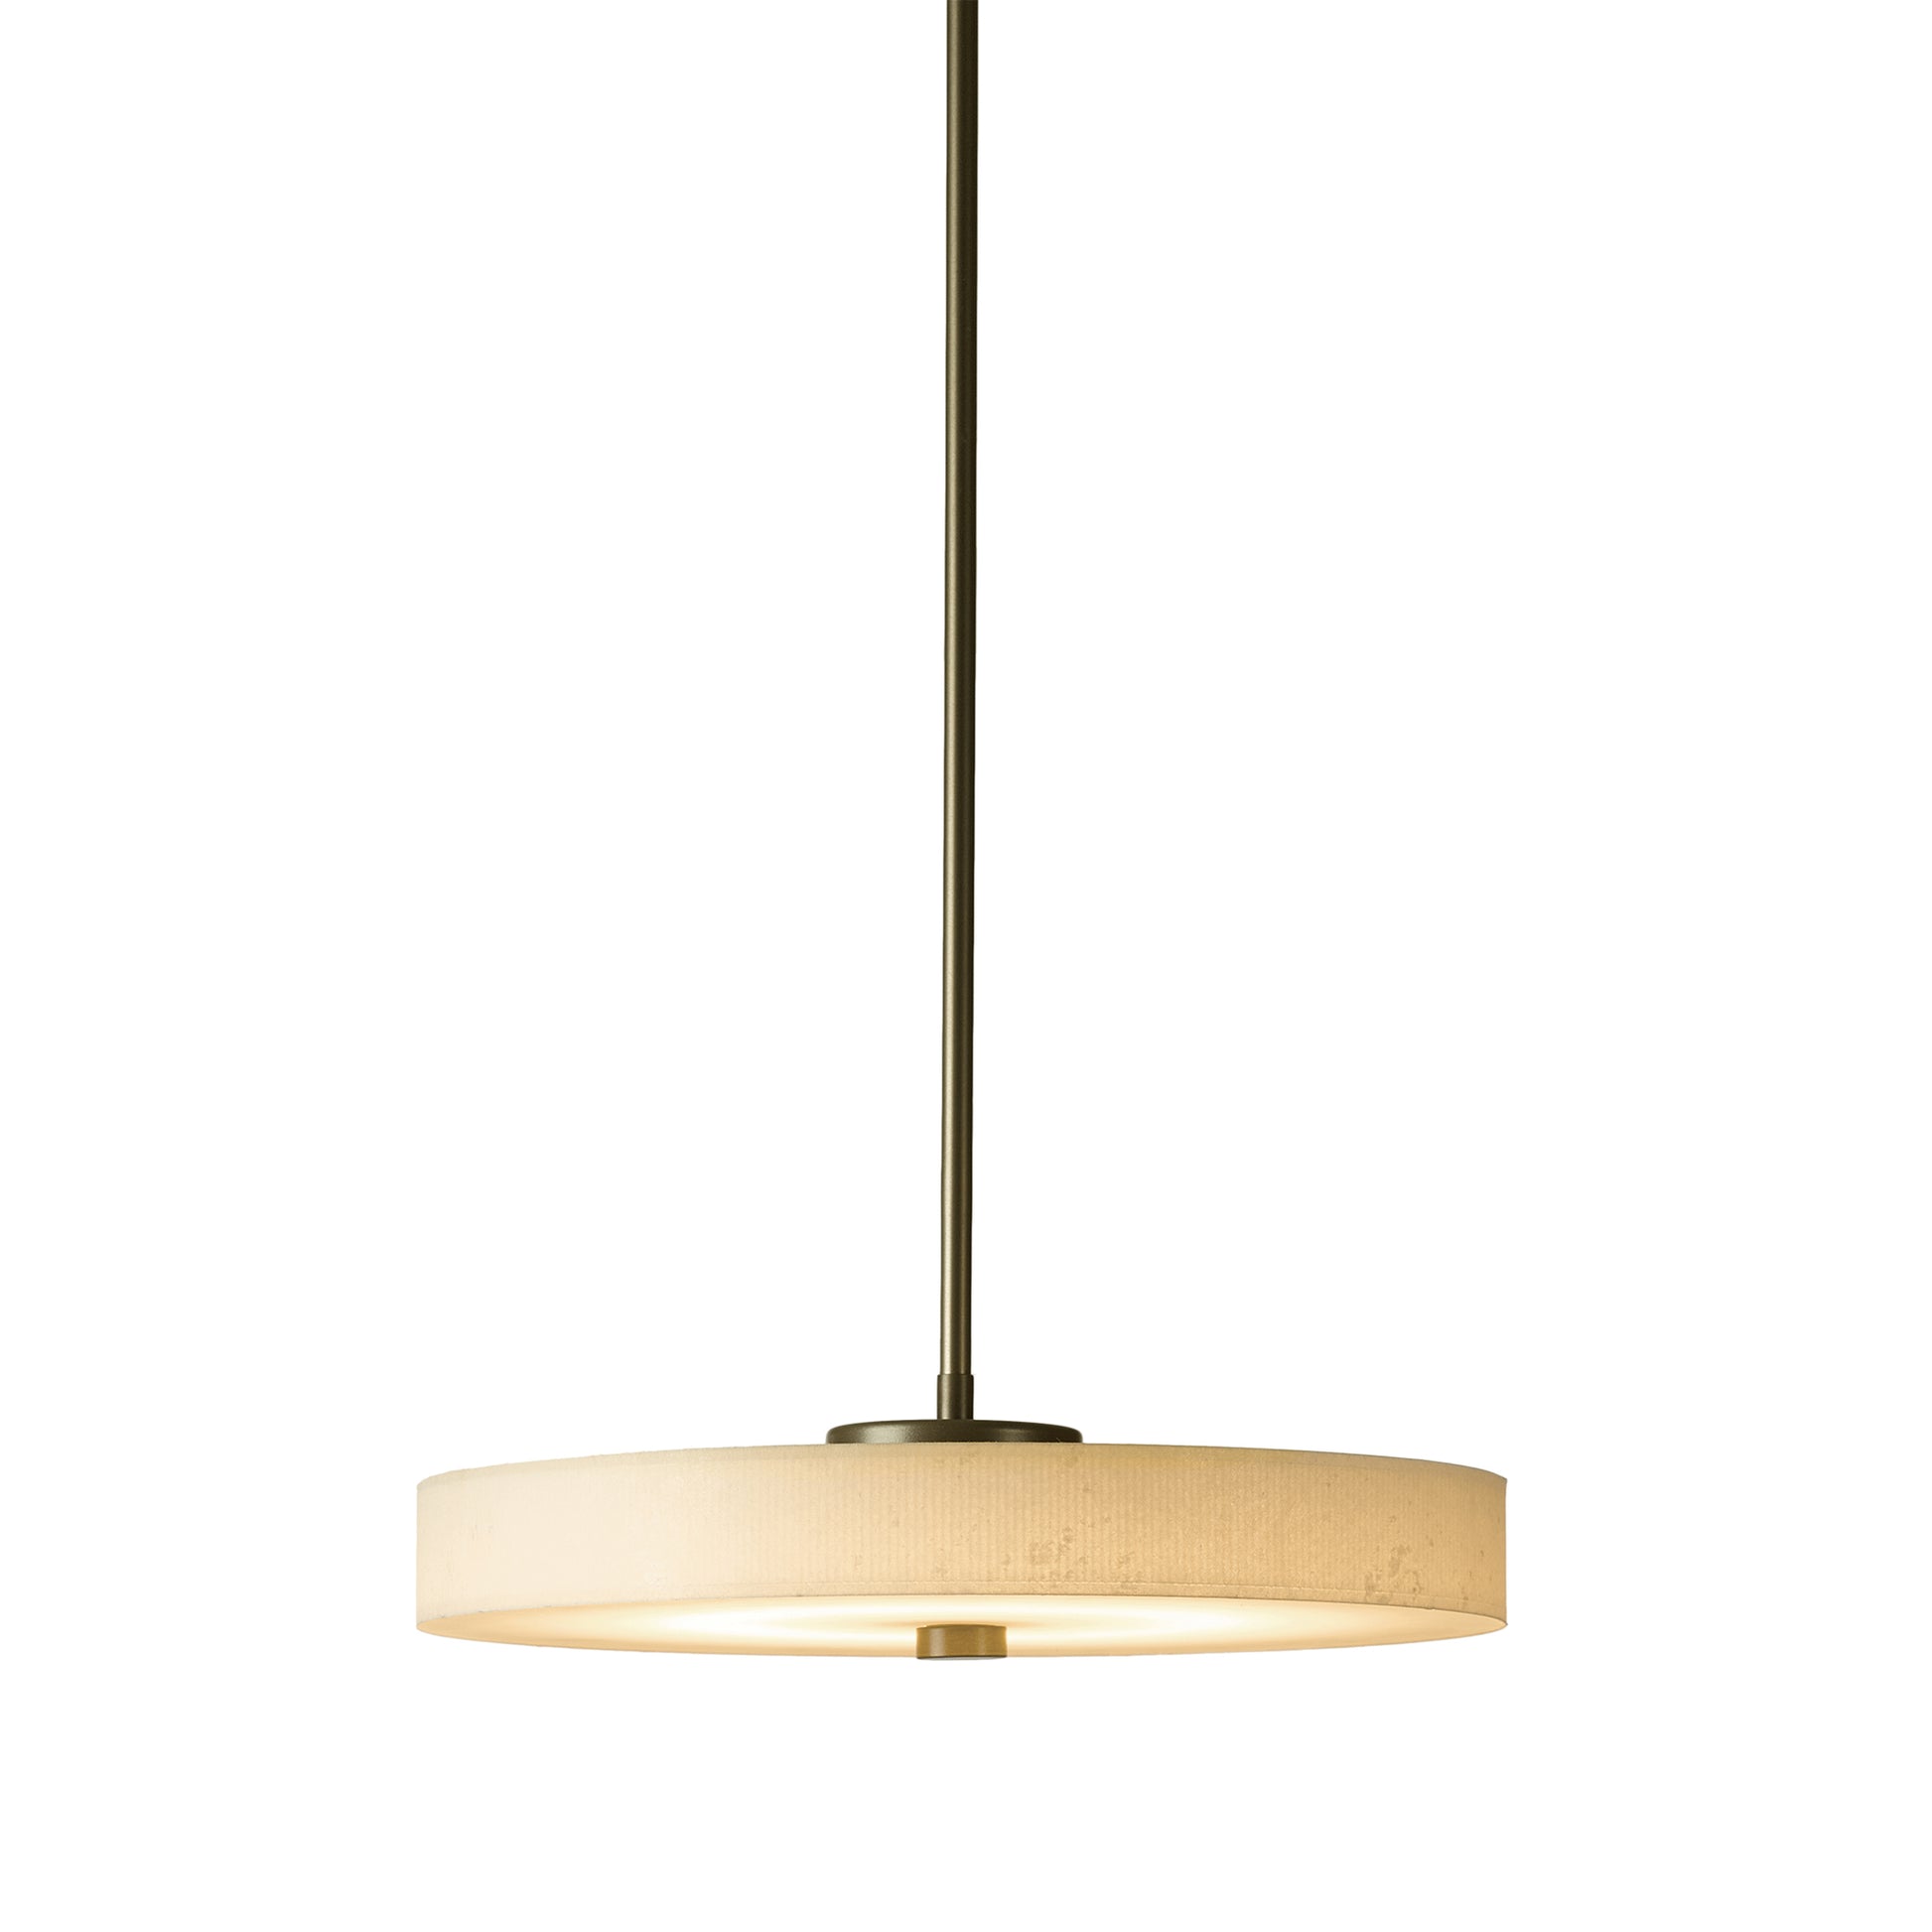 The Hubbardton Forge Disq Pendant is a sleek light fixture with a round shade on a white background. This pendant features dimmable LED light source, ensuring the perfect lighting ambiance for.